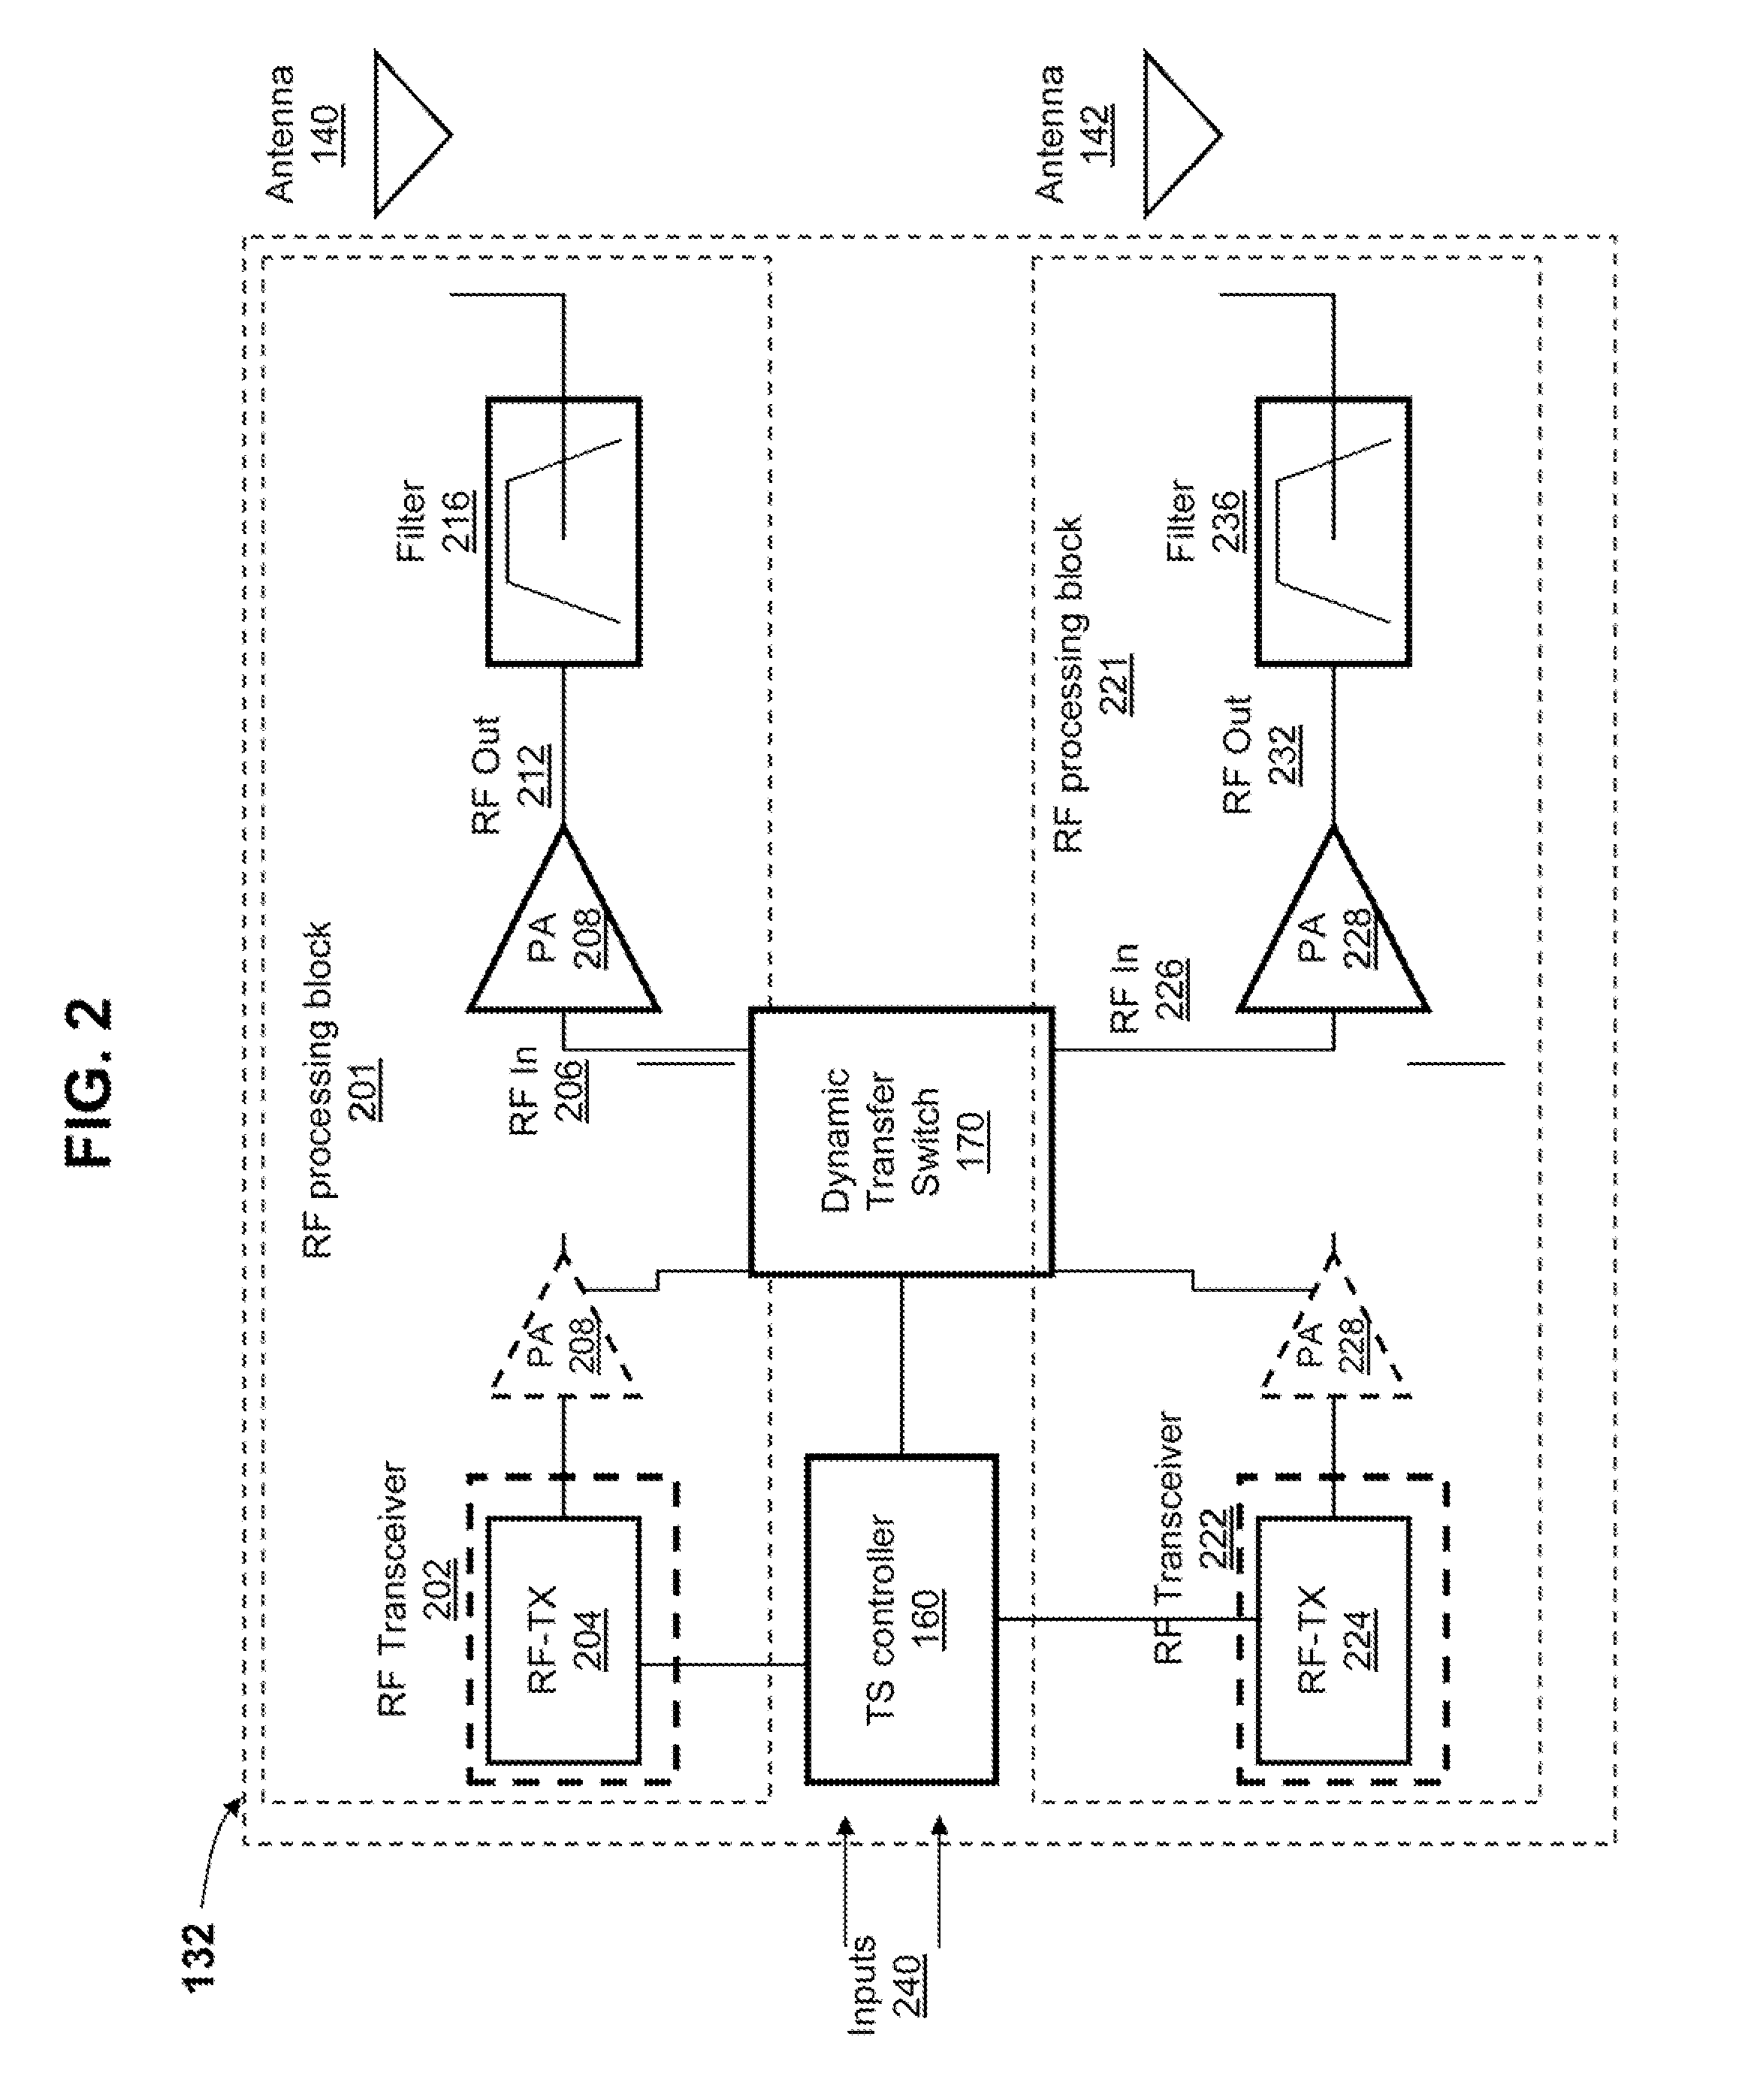 Antenna transfer switching for simultaneous voice and data